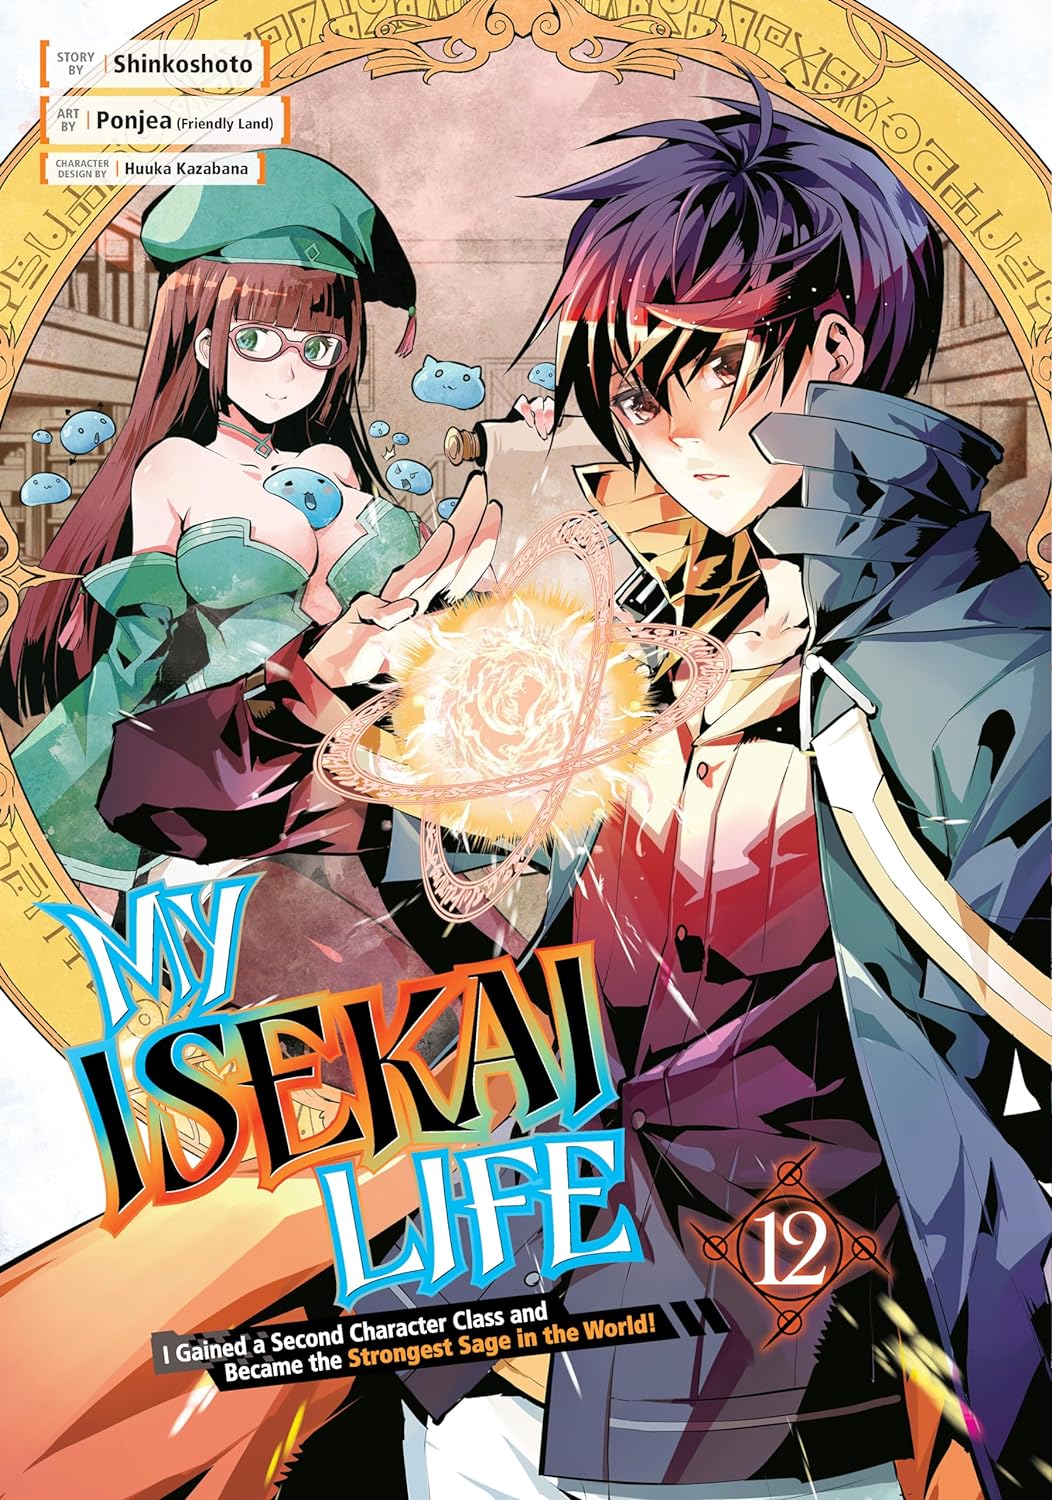 My Isekai Life: I Gained a Second Character Class and Became the Strongest Sage in the World! Vol. 12